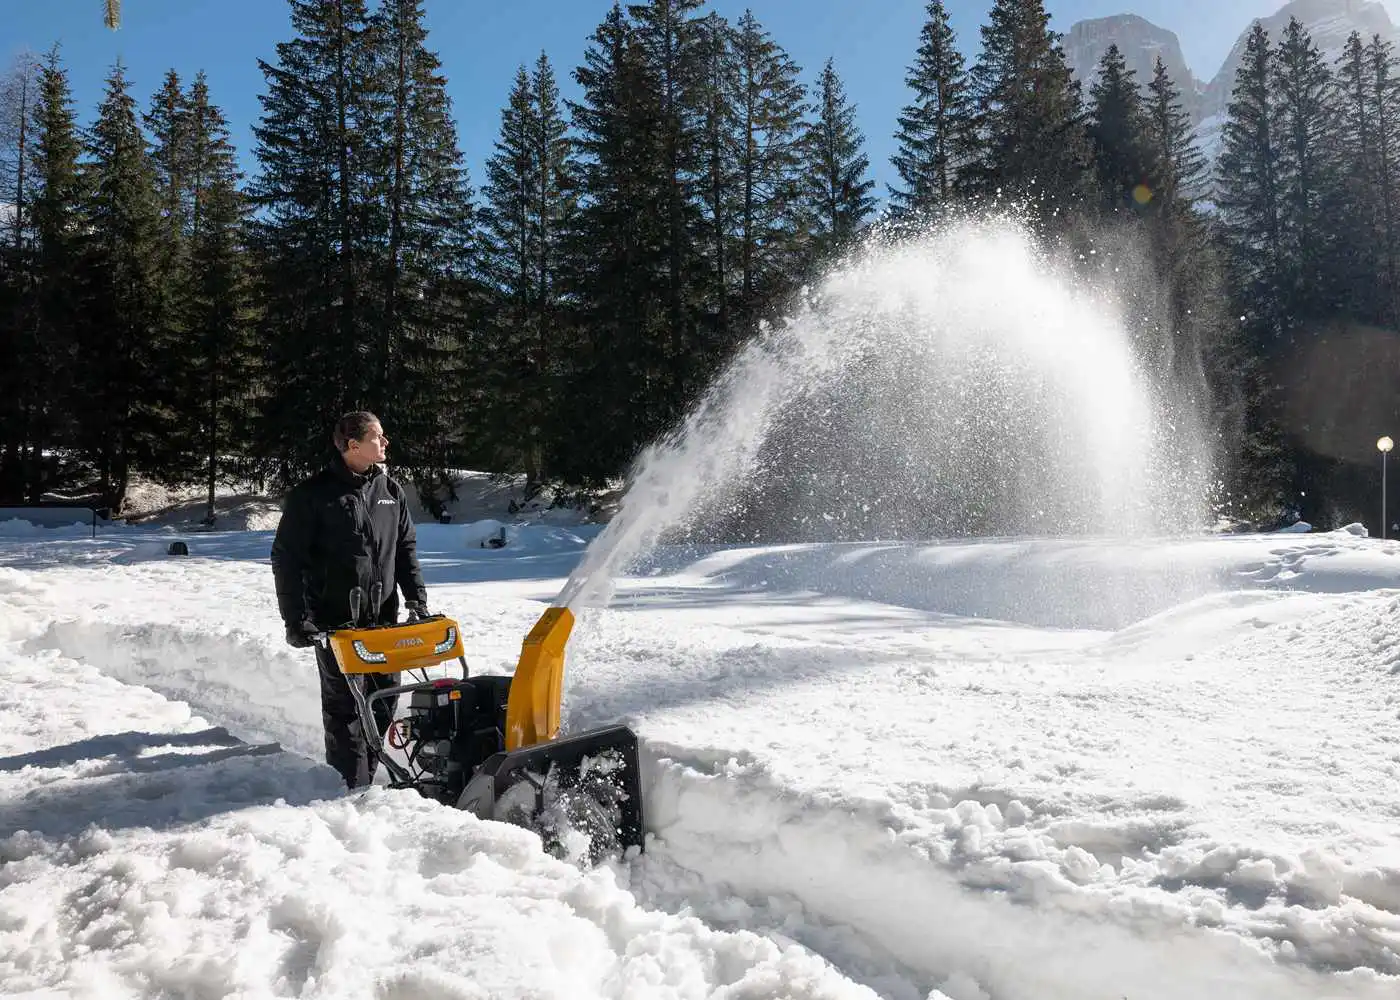 Which snow blower should you choose? Stiga petrol snowblowers - the choice is yours!